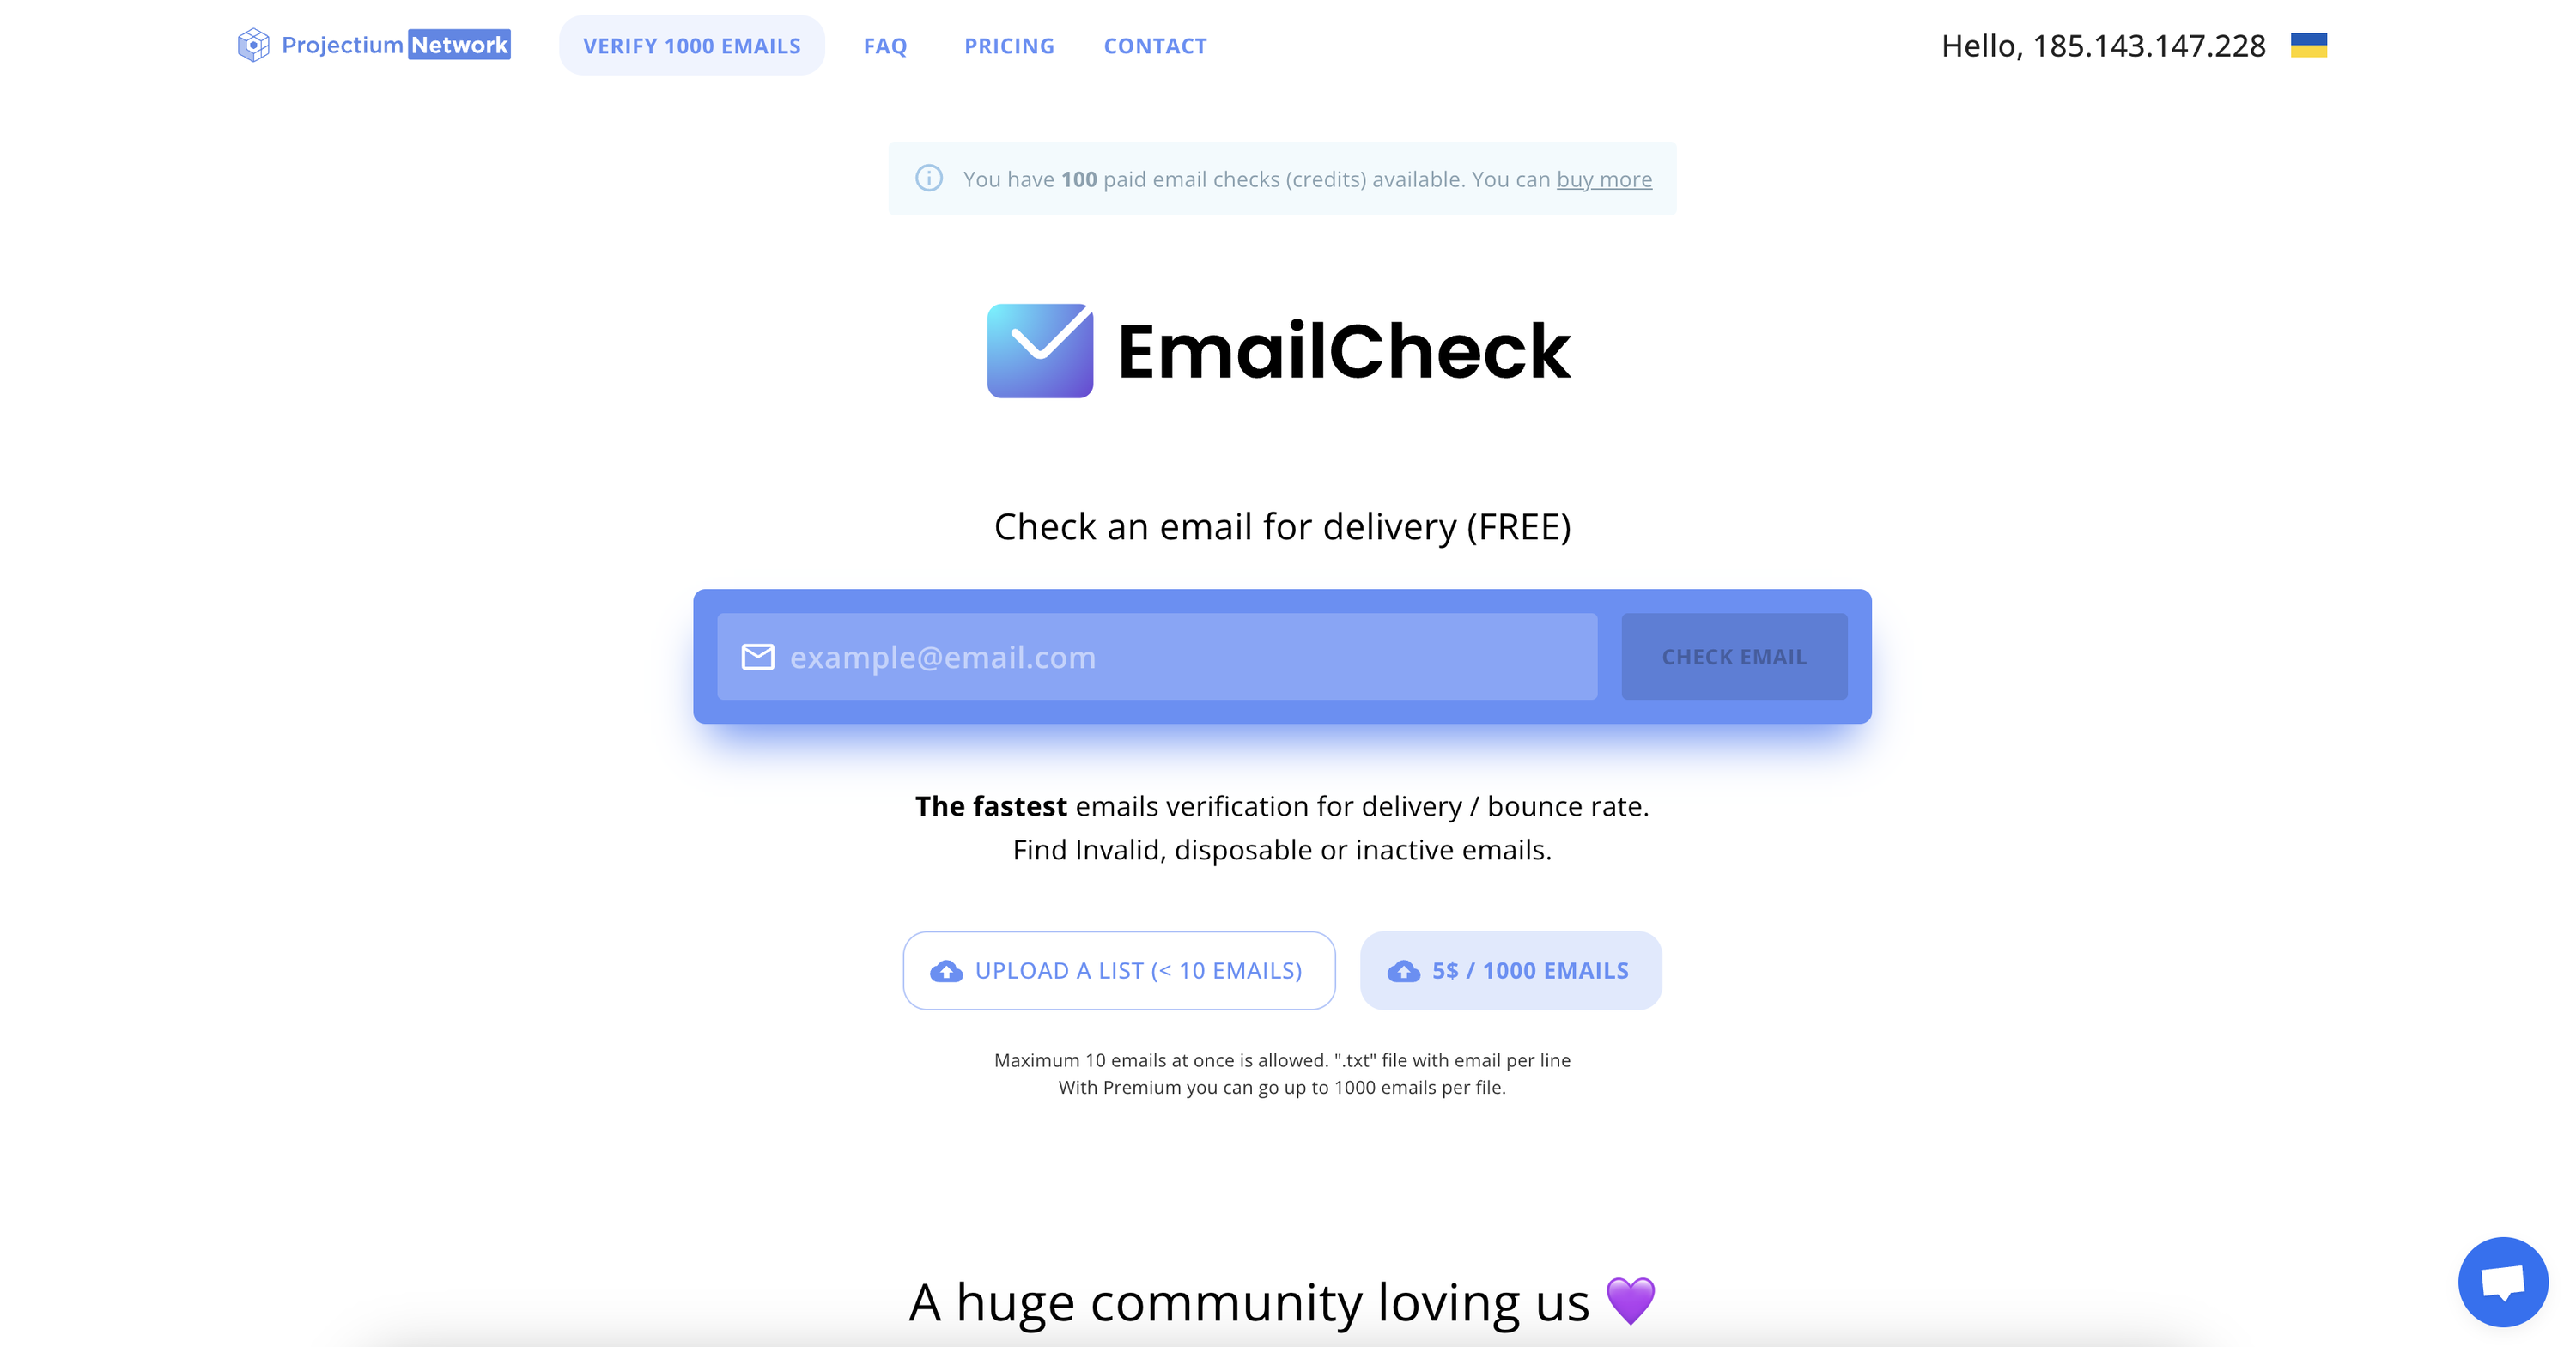 Projectium Network EmailCheck Landing page